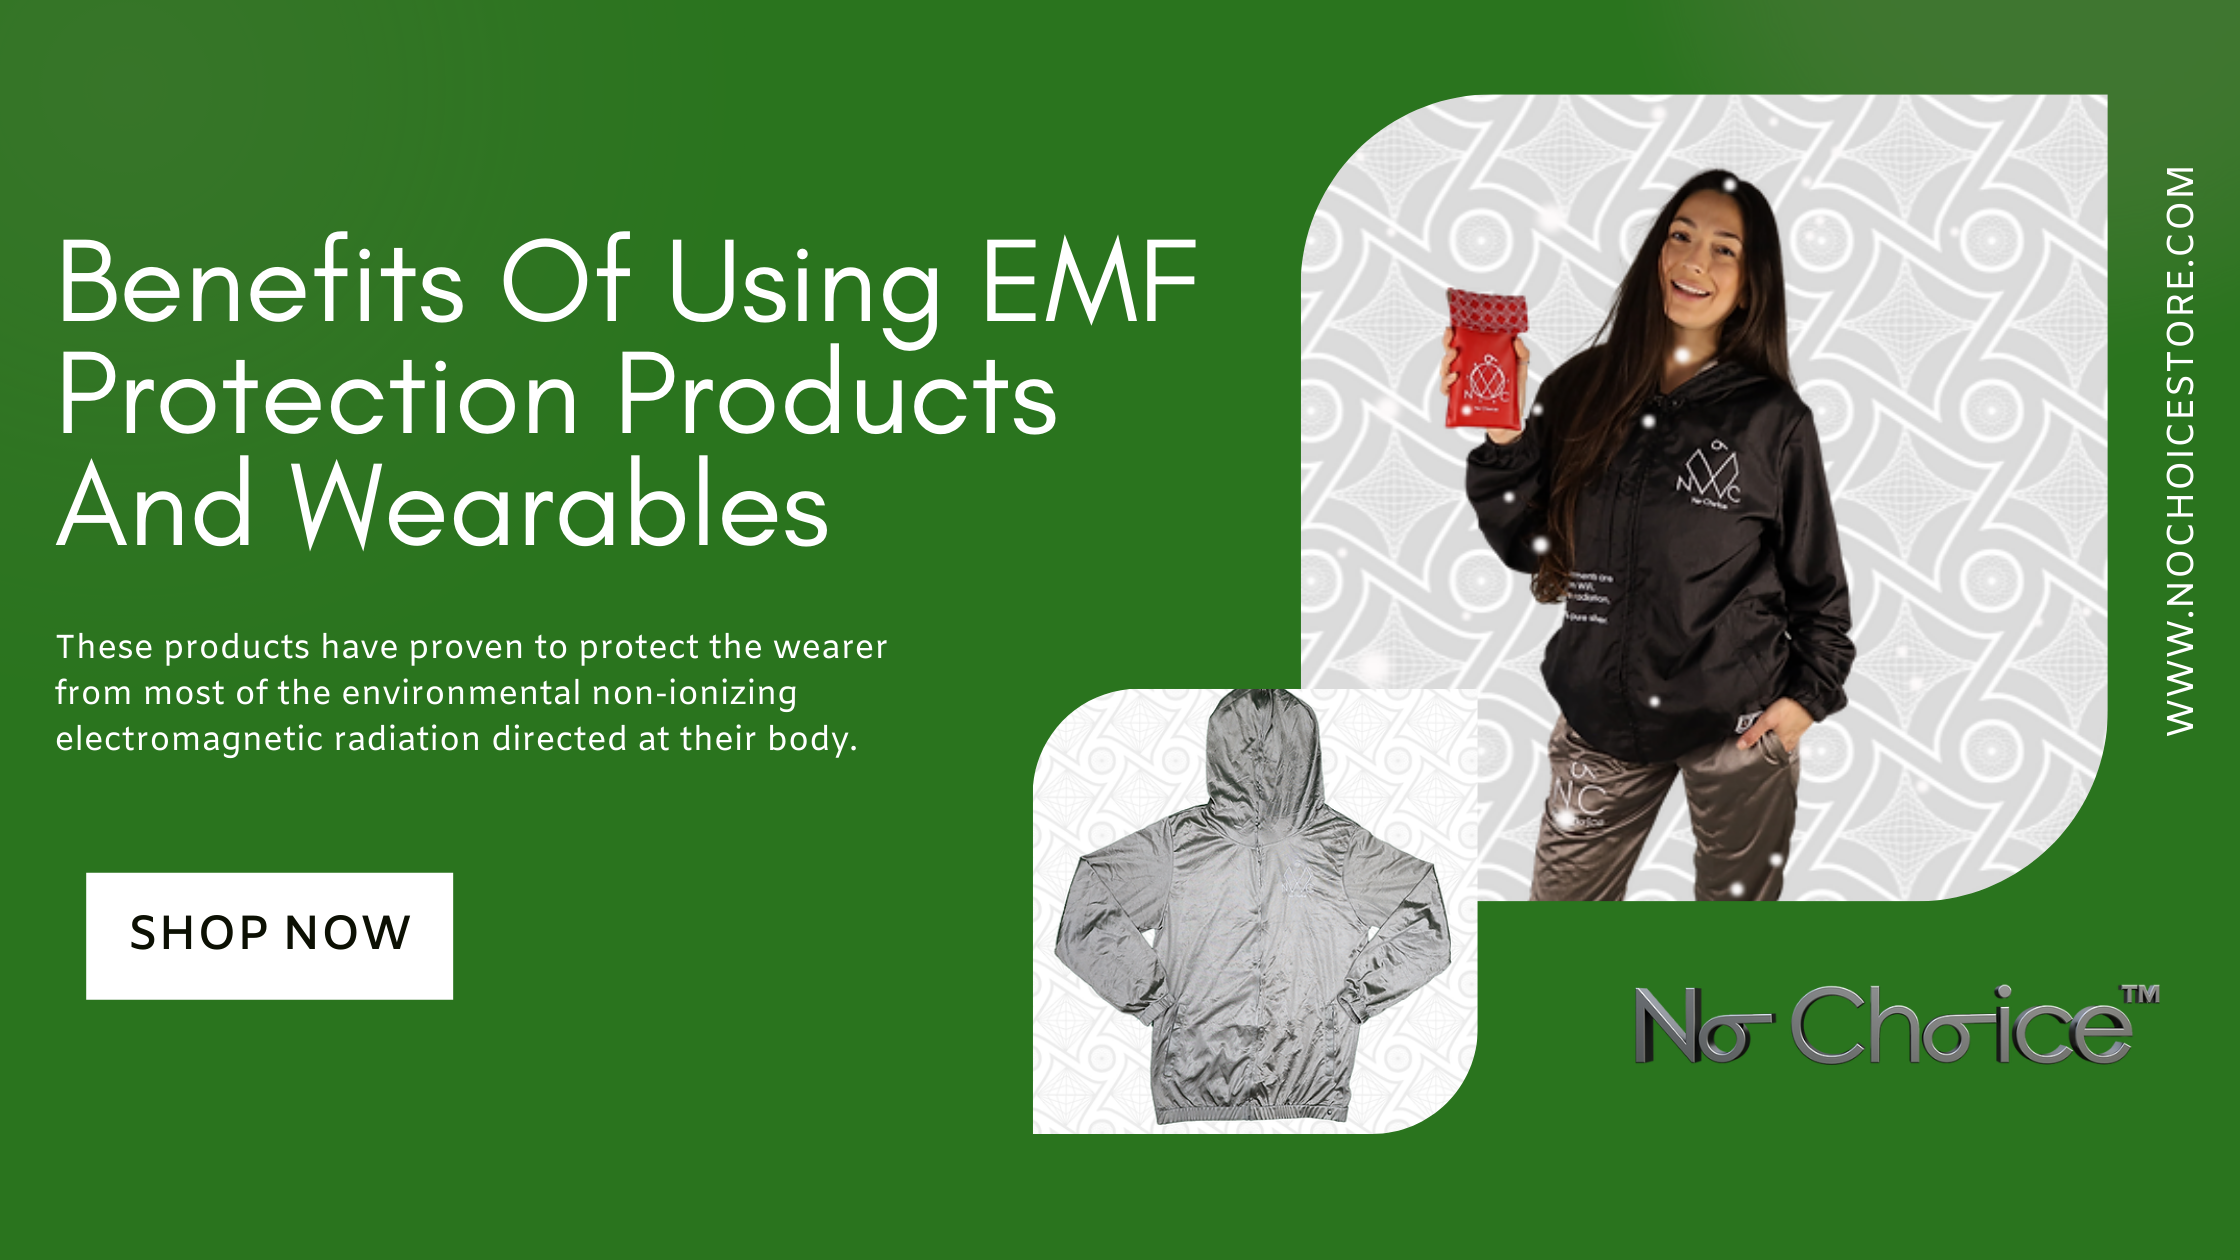 public/uploads/2022/02/Benefits-Of-Using-EMF-Protection-Products-And-Wearables.png